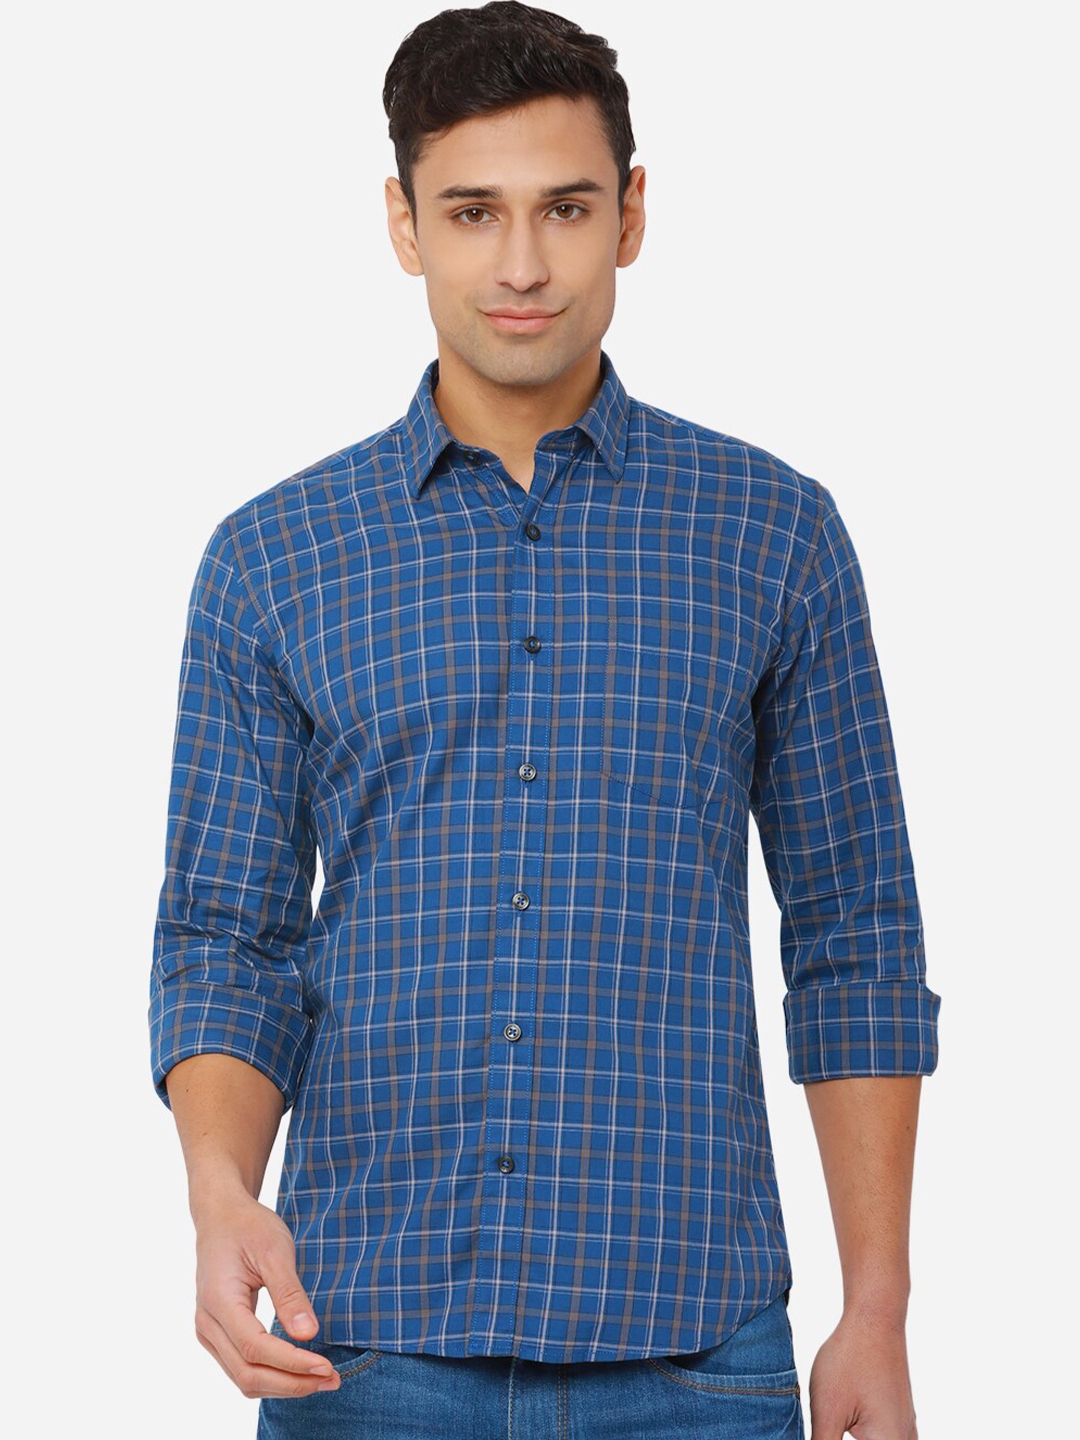 Buy JADE BLUE Men Blue Slim Fit Checked Pure Cotton Casual Shirt ...